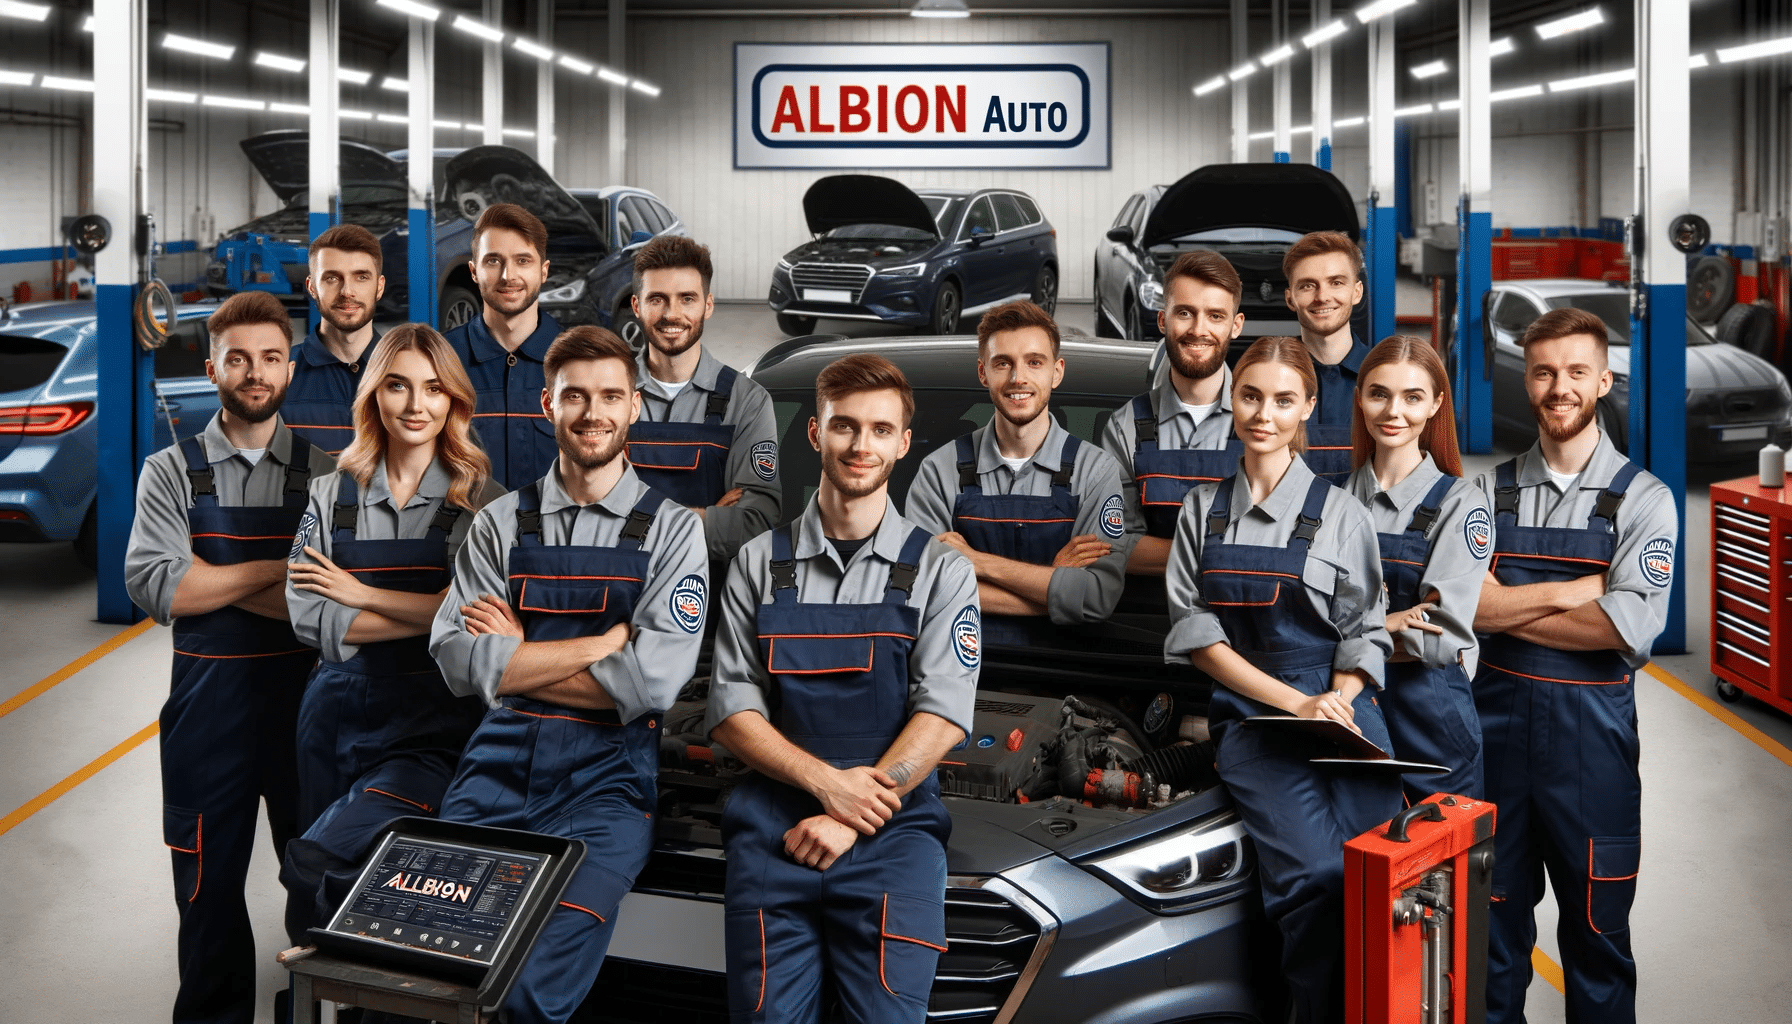 A-team-of-skilled-mechanics-at-albion-auto-working-together-on-a-fleet-of-vehicles